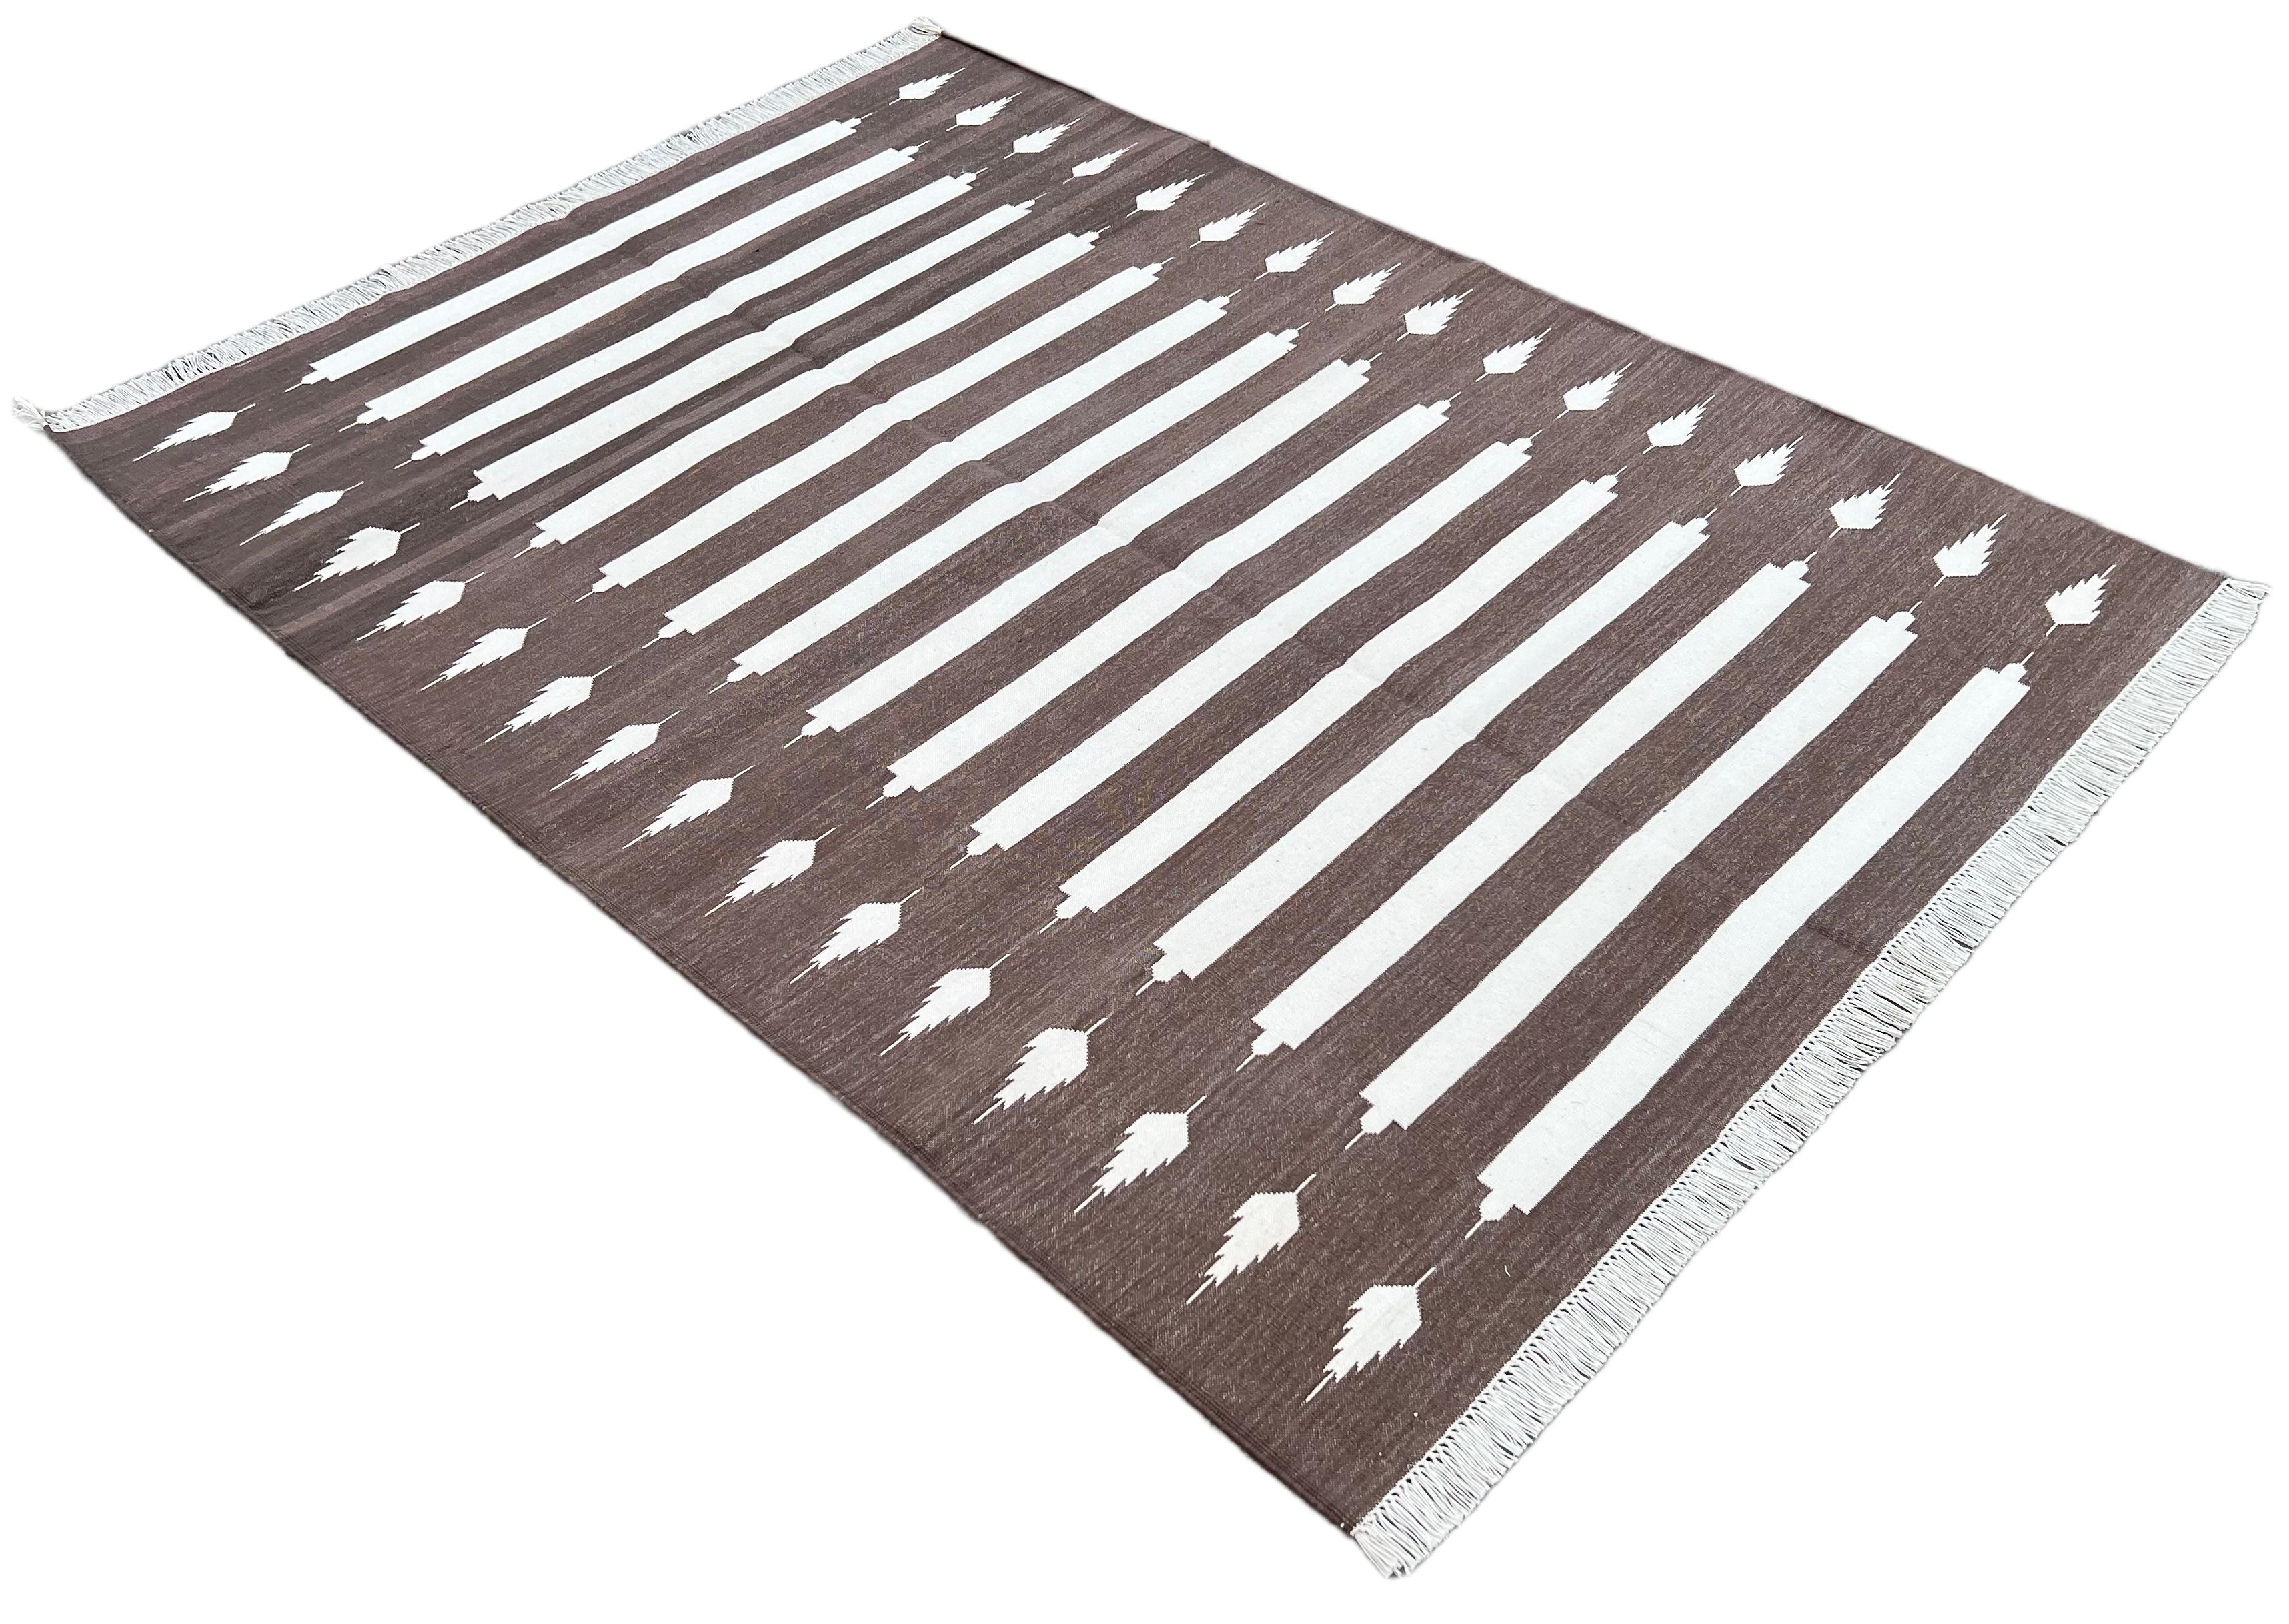 Cotton Natural Vegetable Dyed Brown And White Striped Indian Rug-4'x6'
These special flat-weave dhurries are hand-woven with 15 ply 100% cotton yarn. Due to the special manufacturing techniques used to create our rugs, the size and color of each